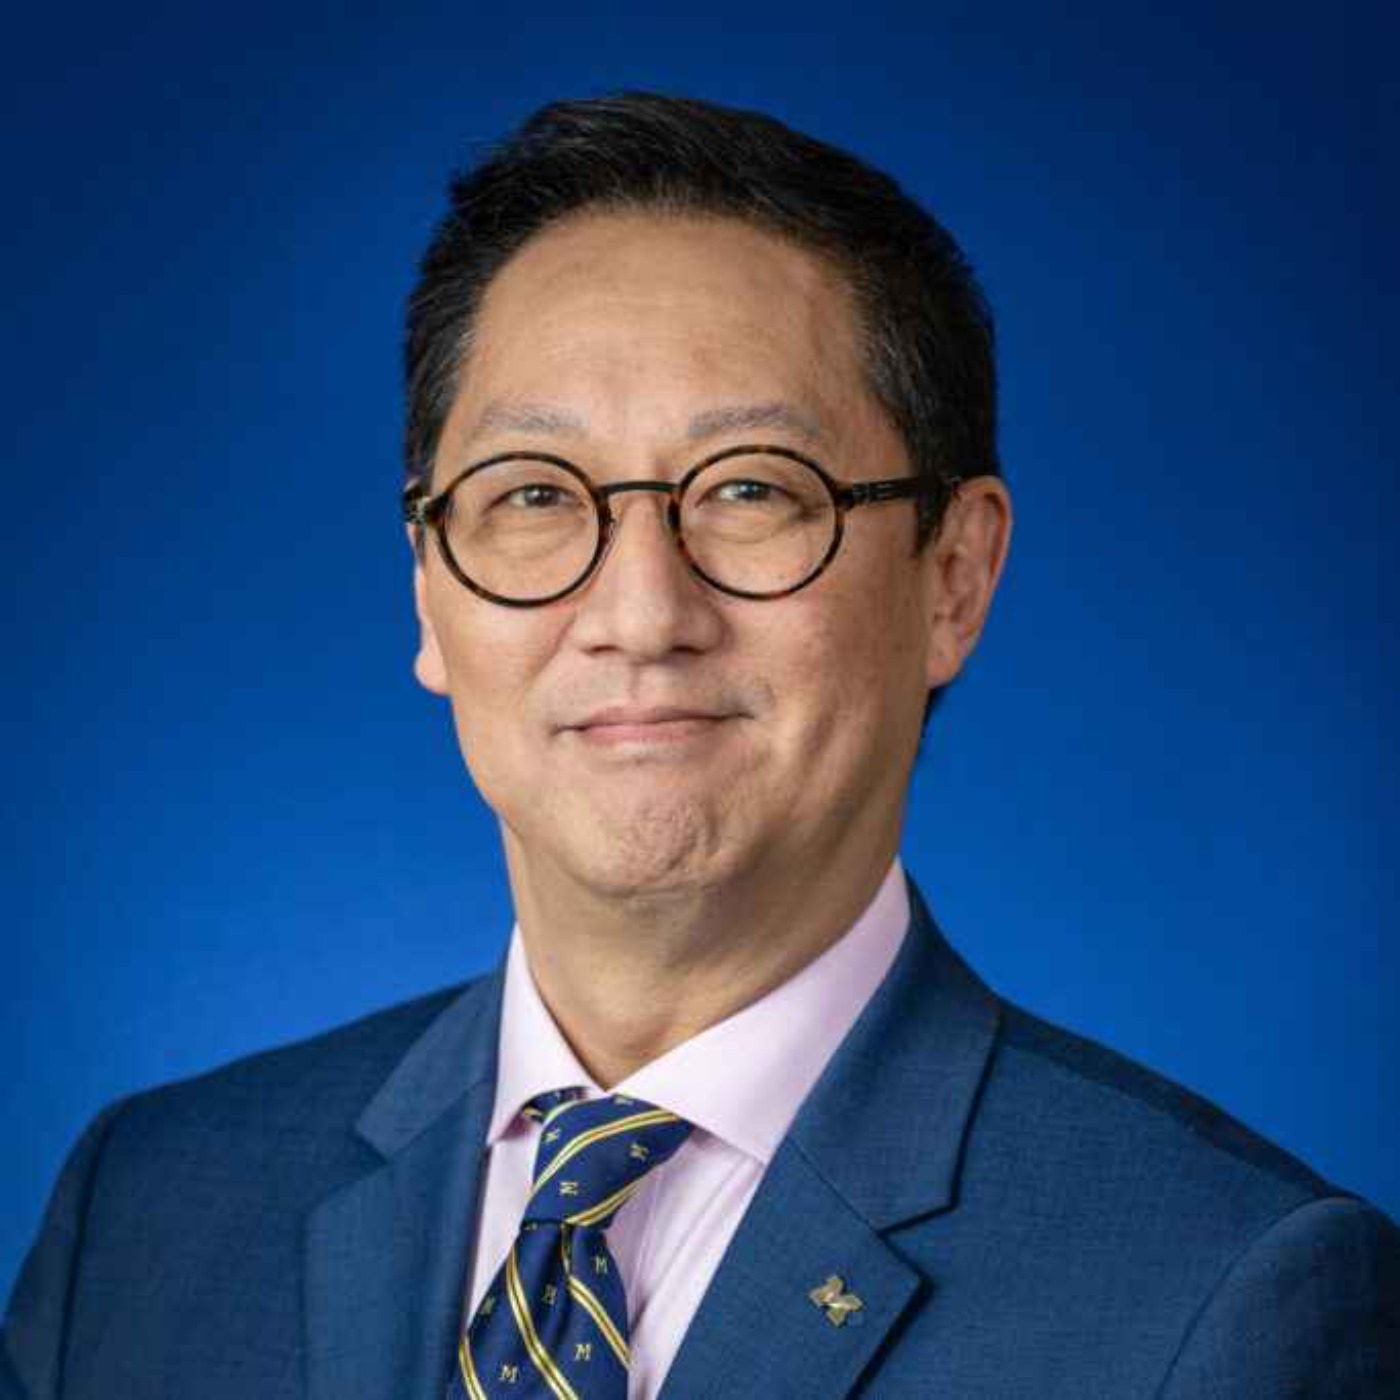 President Santa J. Ono shares vision on democracy and engagement